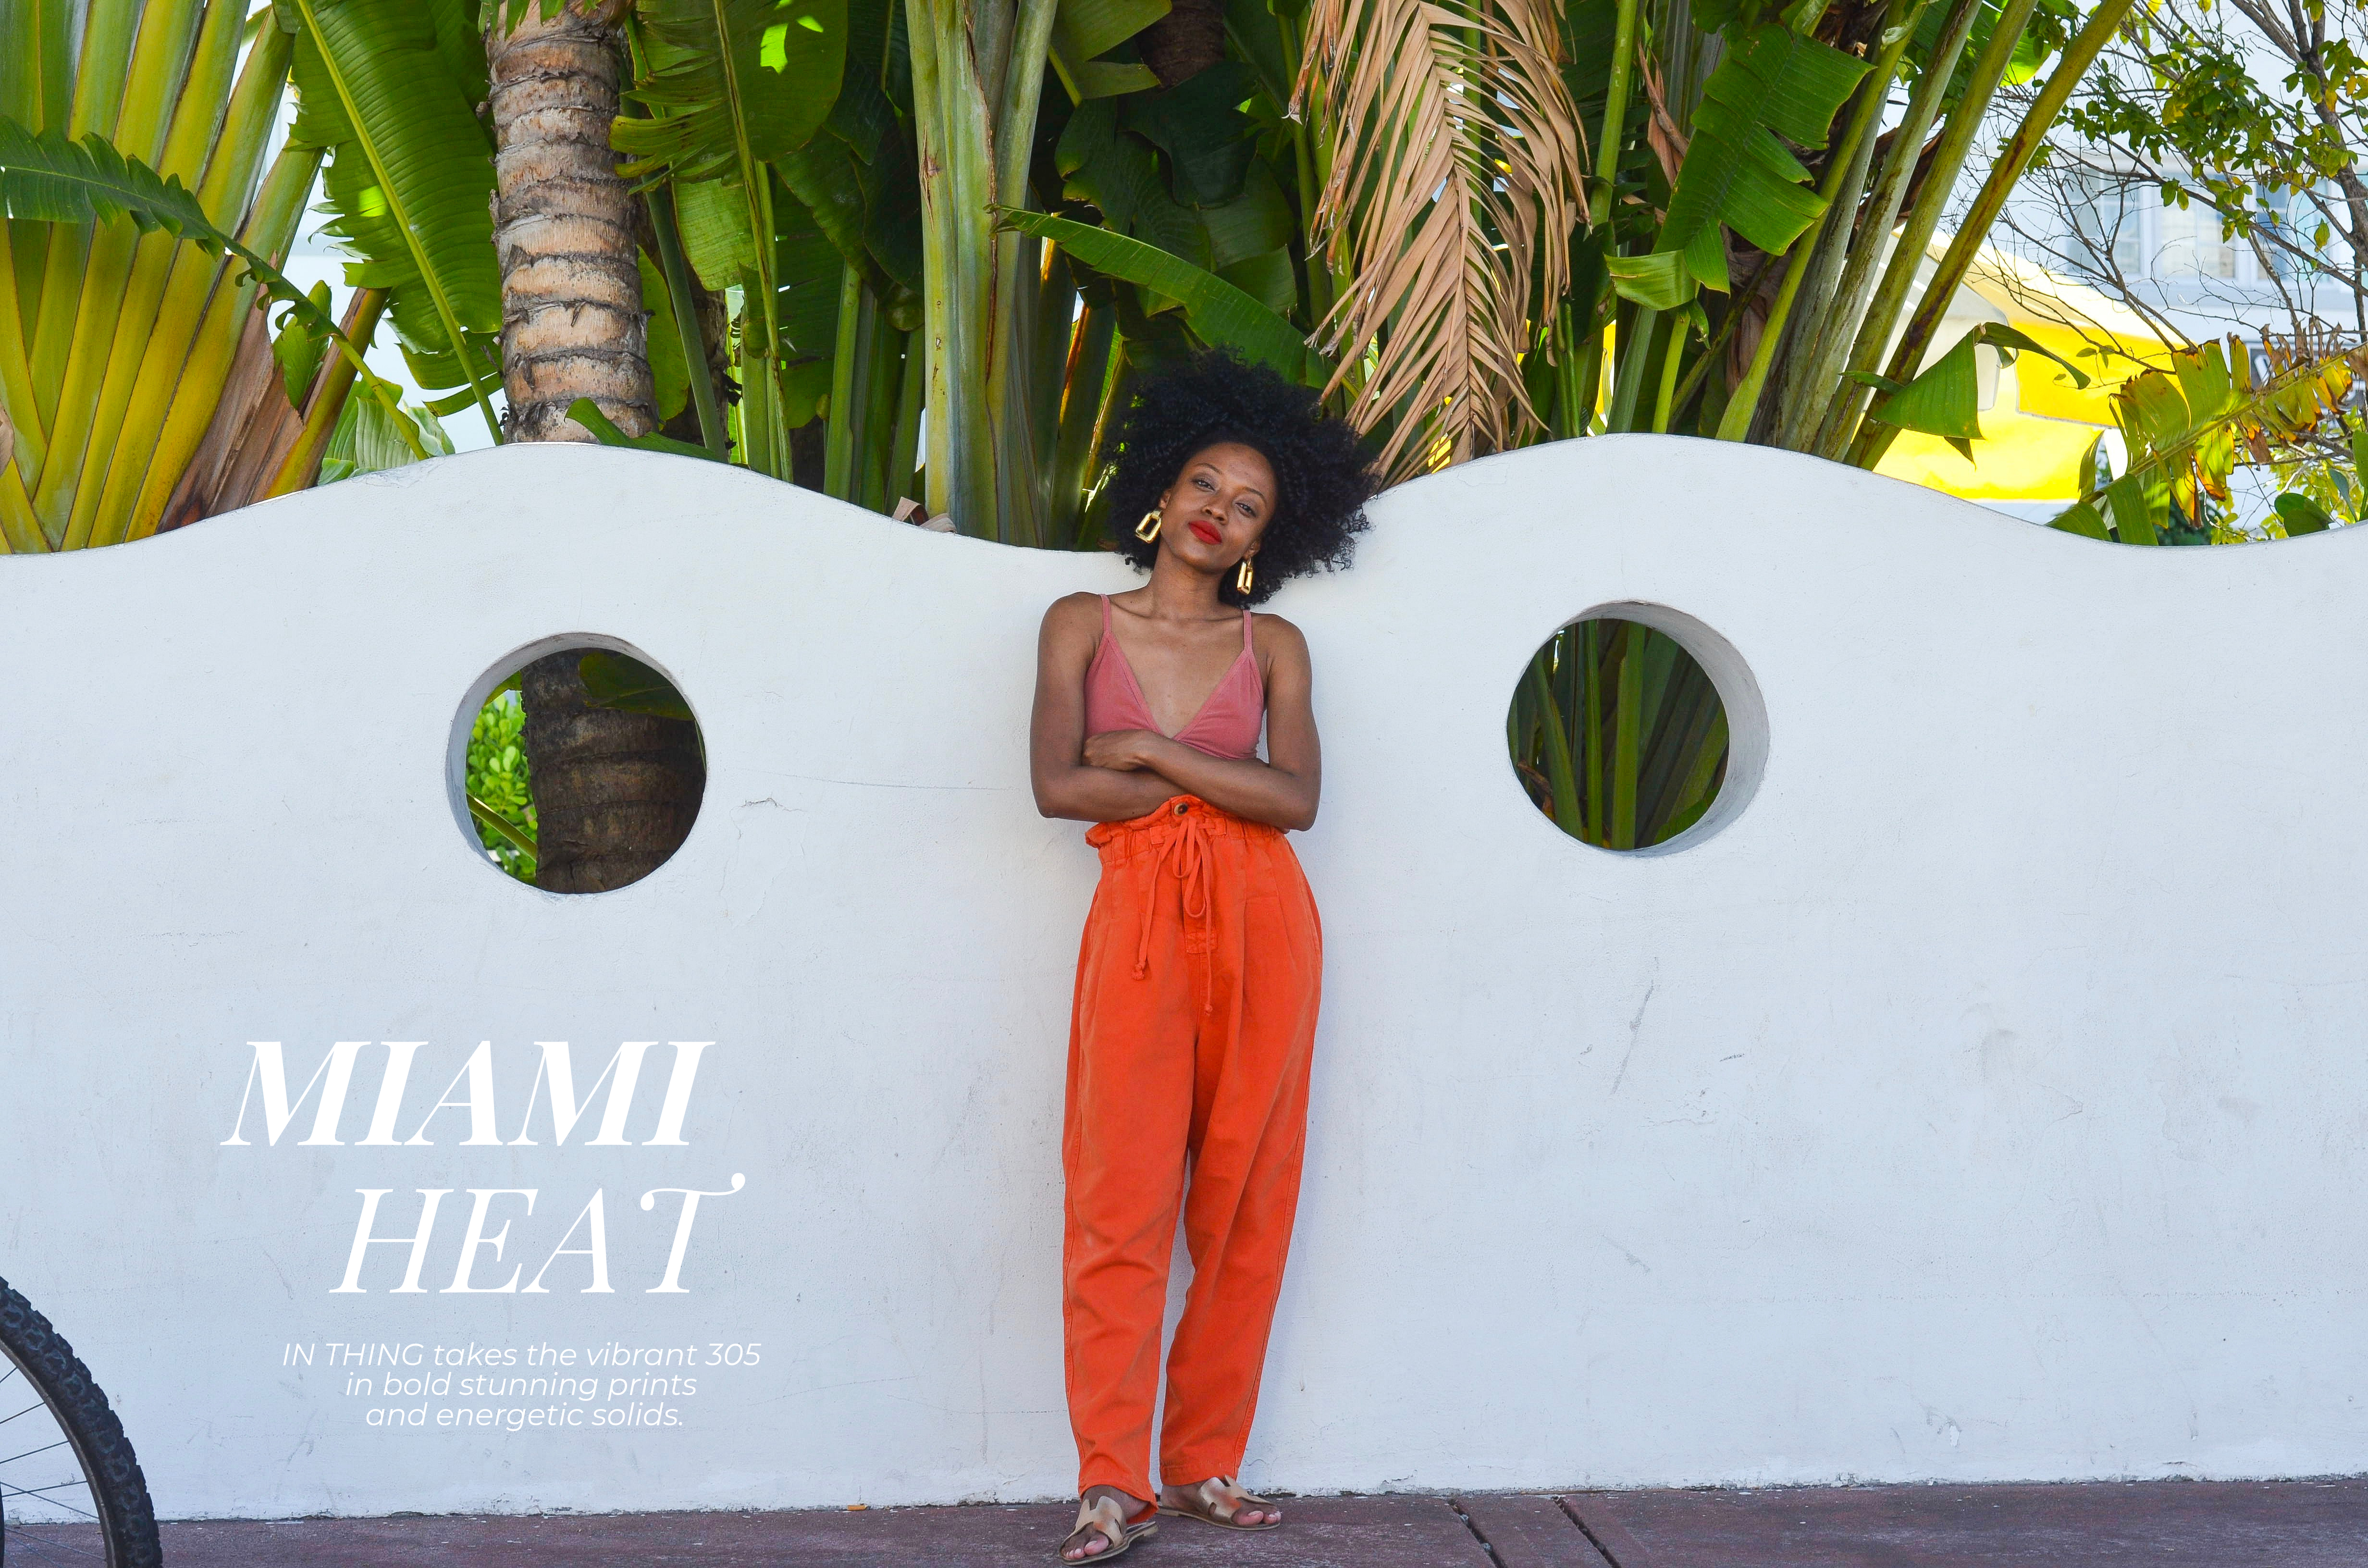 Miami Heat: The 8 vacation outfits you need to pack on your next trip